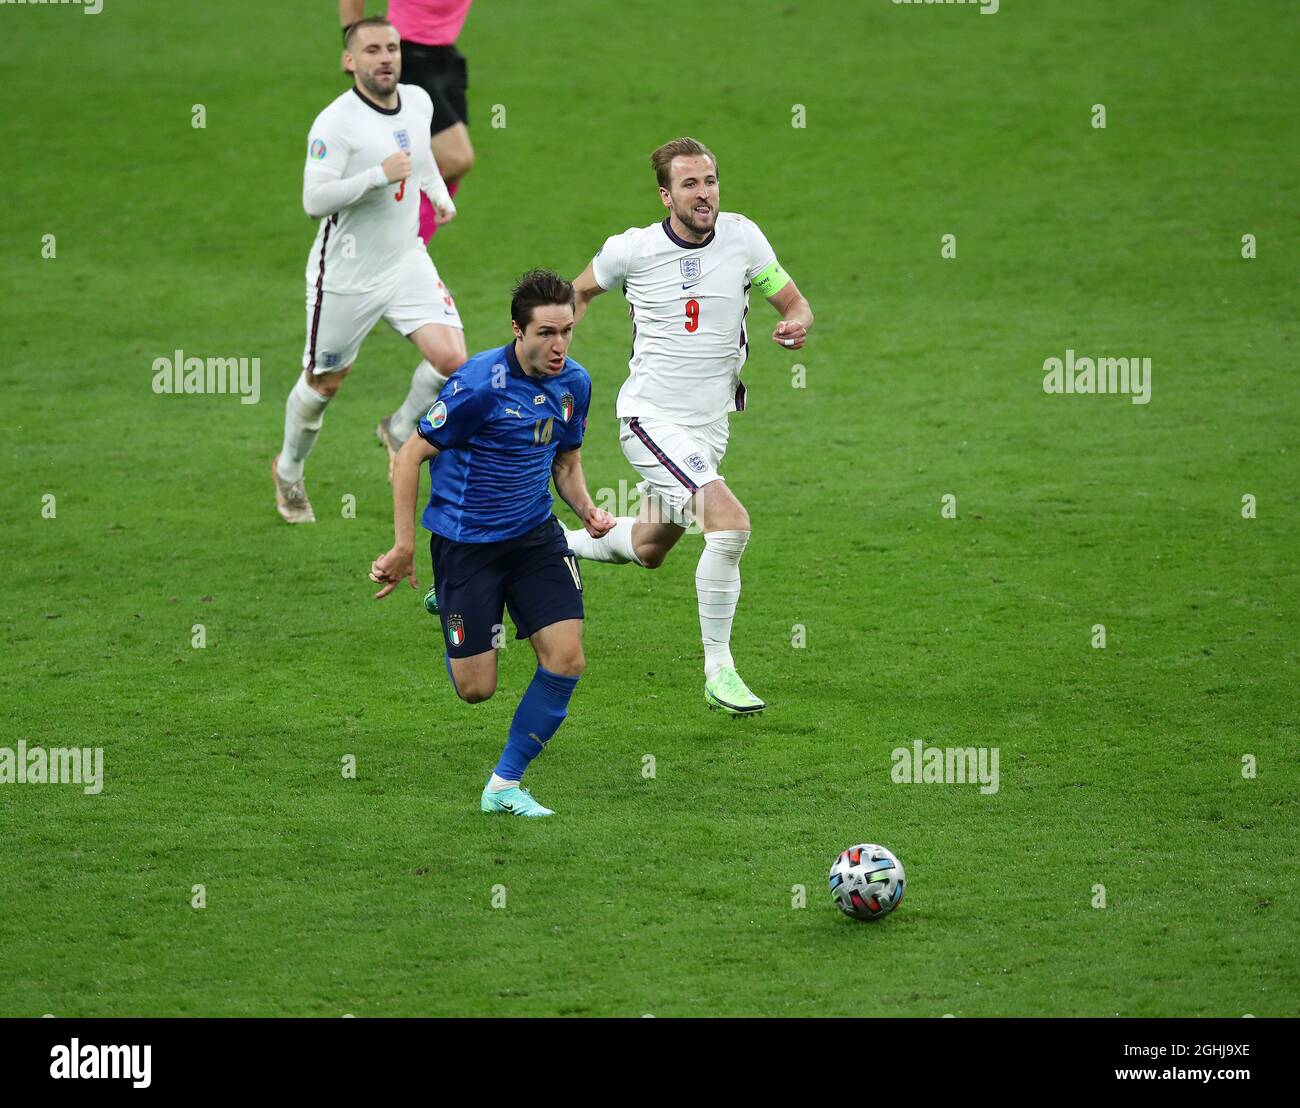 London, England, 11th July 2021. Federico Chiesa of Italy during the UEFA European Championships final match at Wembley Stadium, London. Picture credit should read: David Klein / Sportimage via PA Images Stock Photo